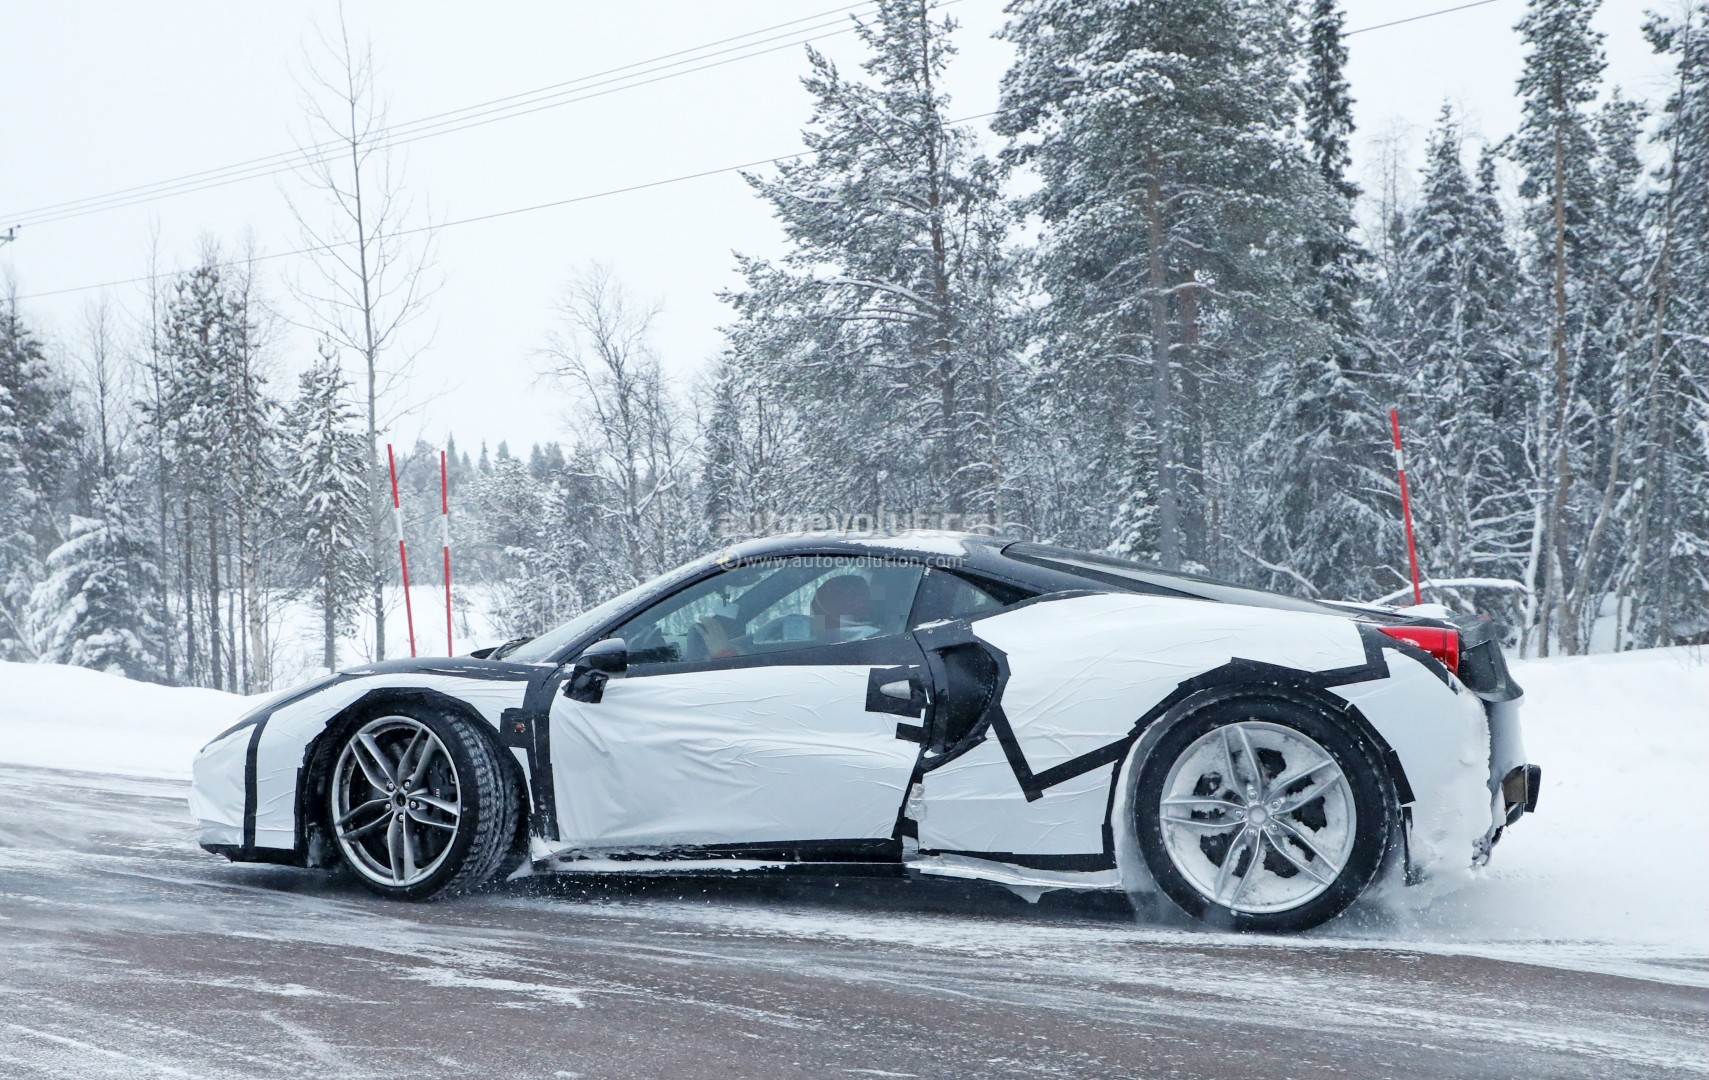 2019 - [Ferrari] Roma [F169] - Page 2 New-ferrari-dino-spied-testing-in-sweden-as-458-test-mule-with-v6-soundtrack_6